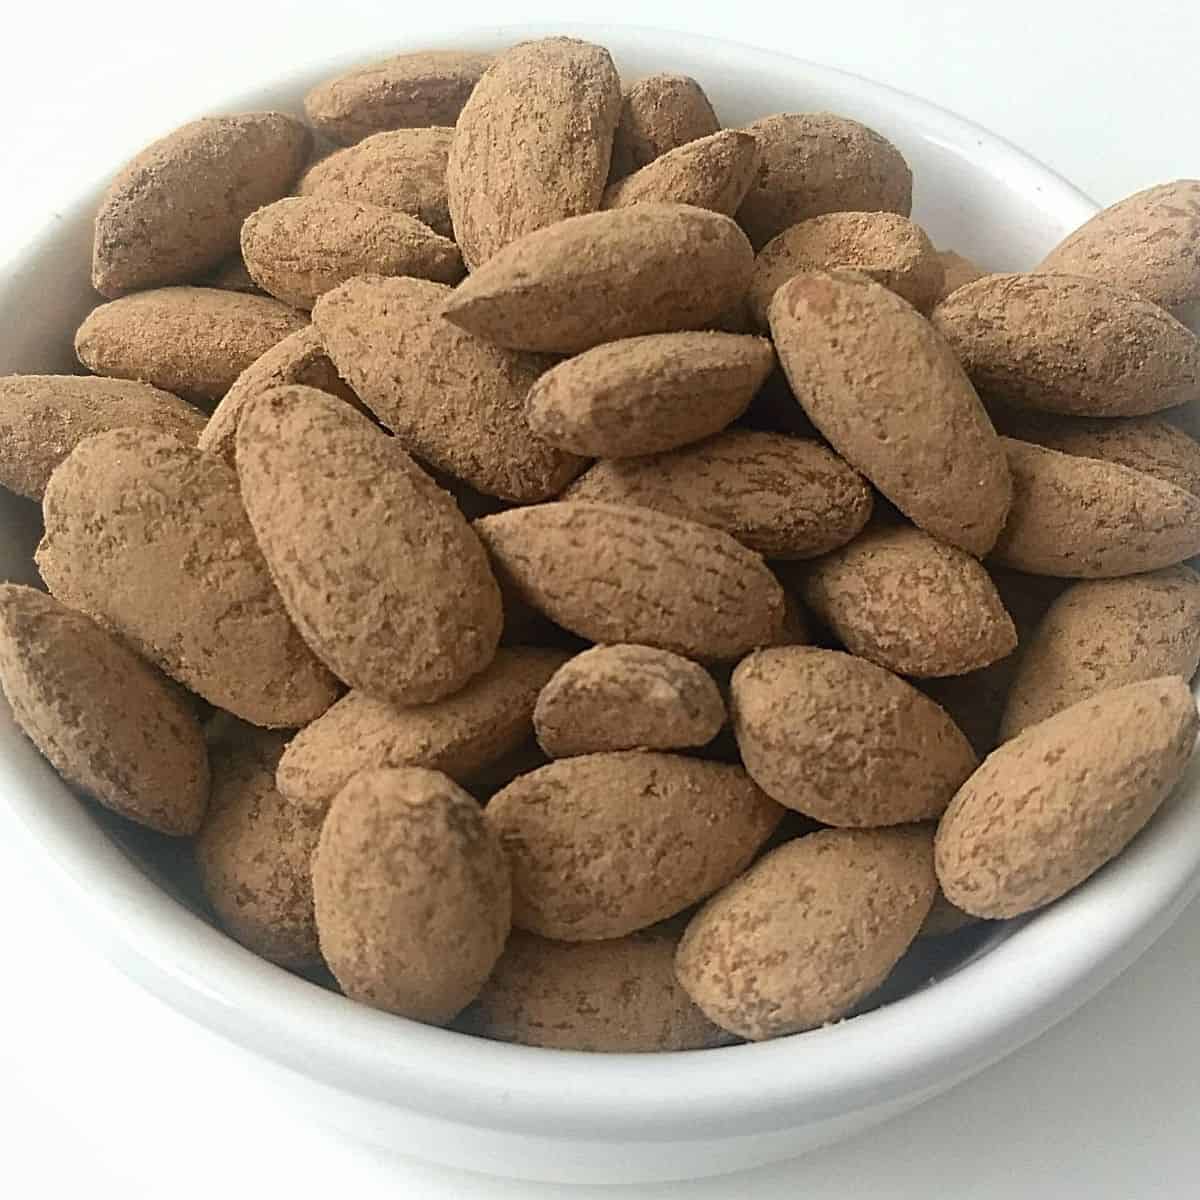 Keto Roasted Almonds - Keto Roasted Almonds: Peanut Butter and Cocoa